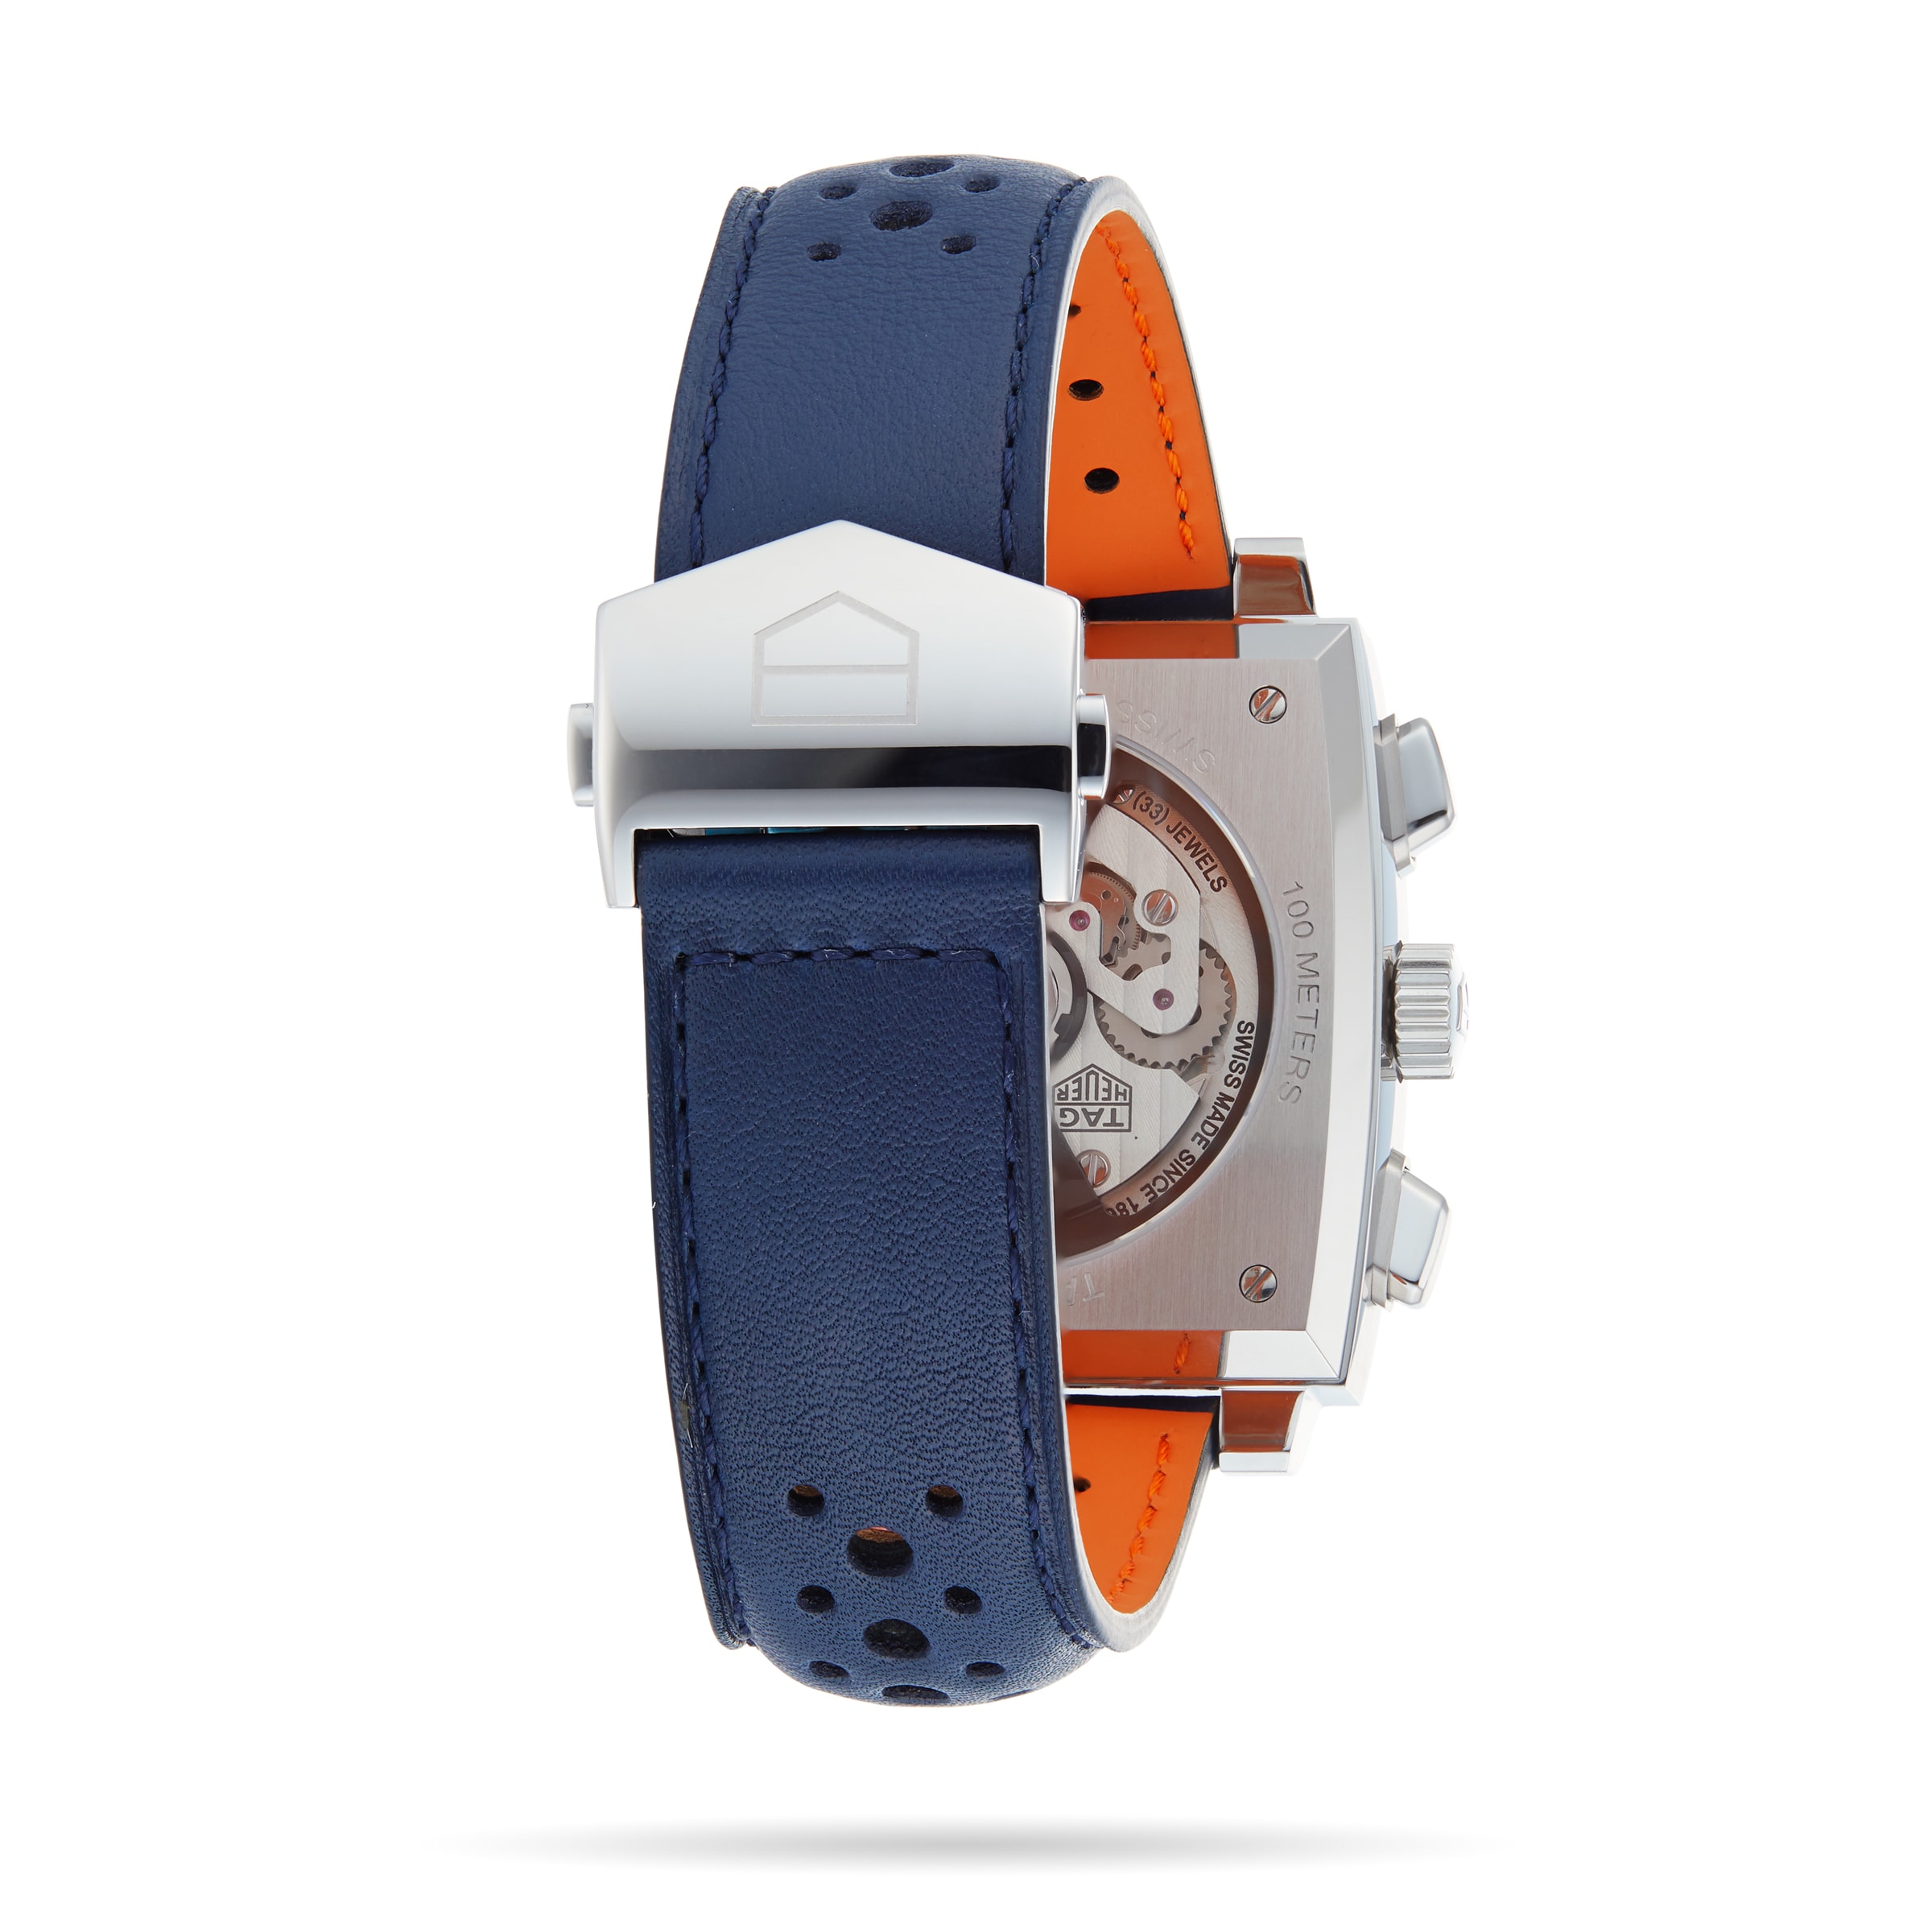 Shop for TAG Heuer x Gulf motorsport inspired timepieces | Gulf Oil  International